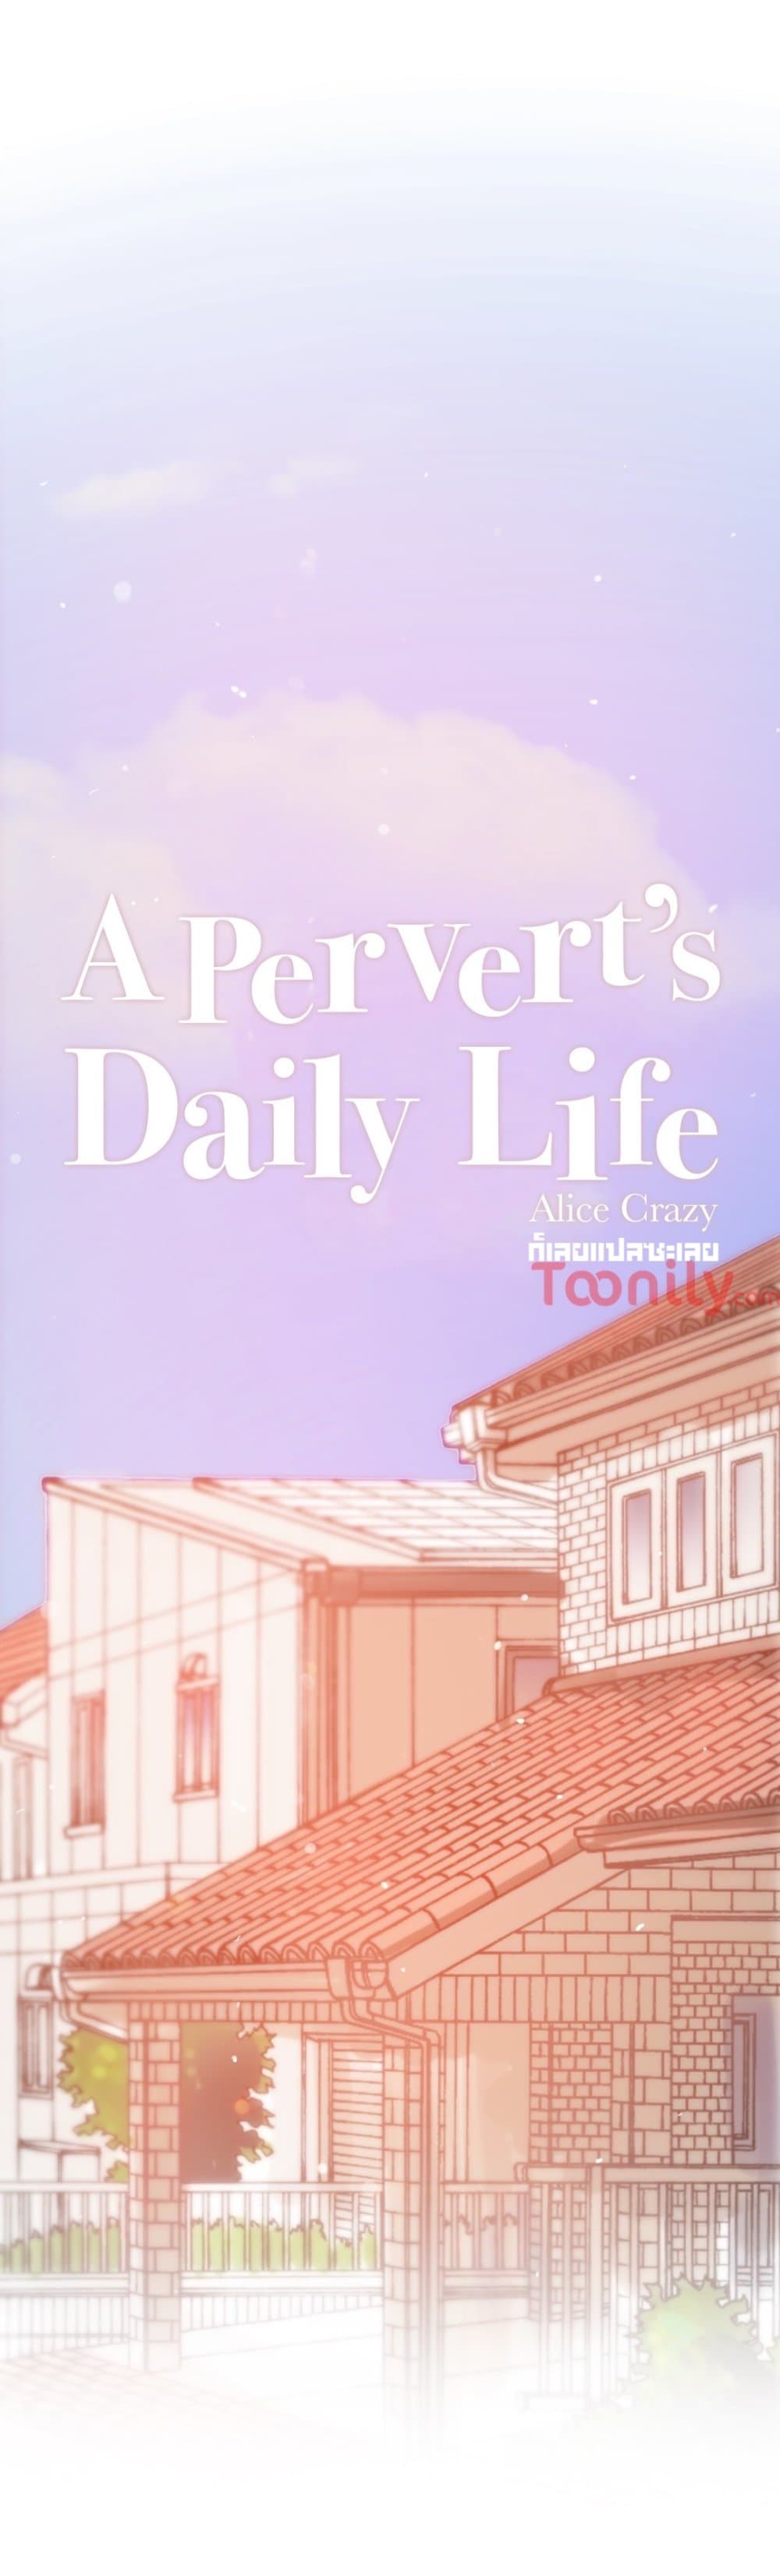 A Pervert's Daily Life 65-65